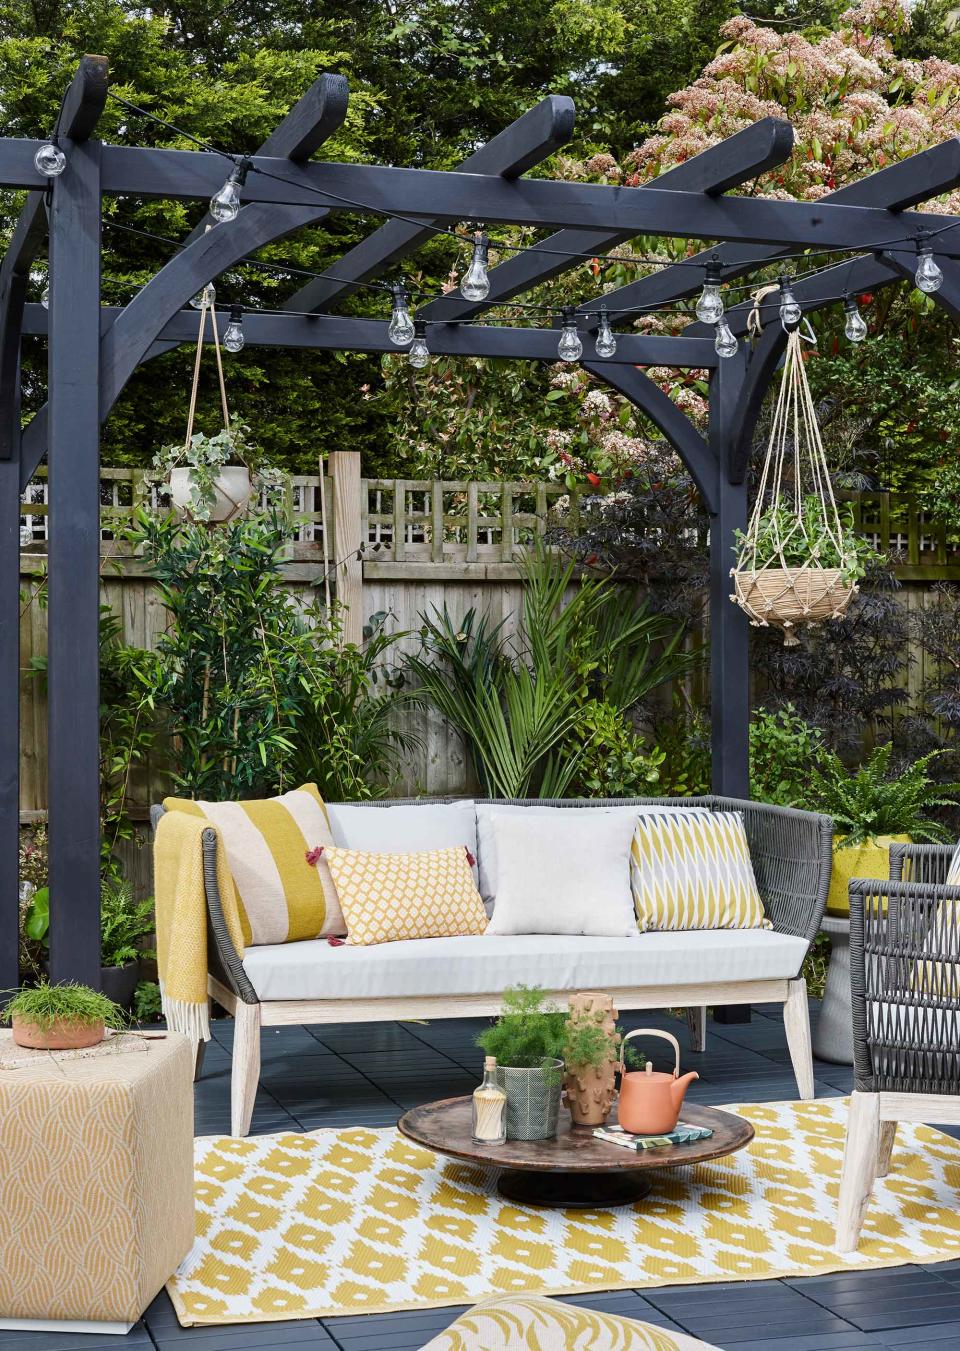 <p> If your garden lacks shelter, then adding a structure like a pergola could be a good option for creating a cozy and welcoming seating area. Painting it a dark color can help it to tie in with your furniture and creates a more fresh and contemporary feel.&#xA0; </p> <p> String&#xA0;festoon lights&#xA0;up for when the sun goes down and frame the area with an outdoor rug and matching cushions to add to the homely style. </p>